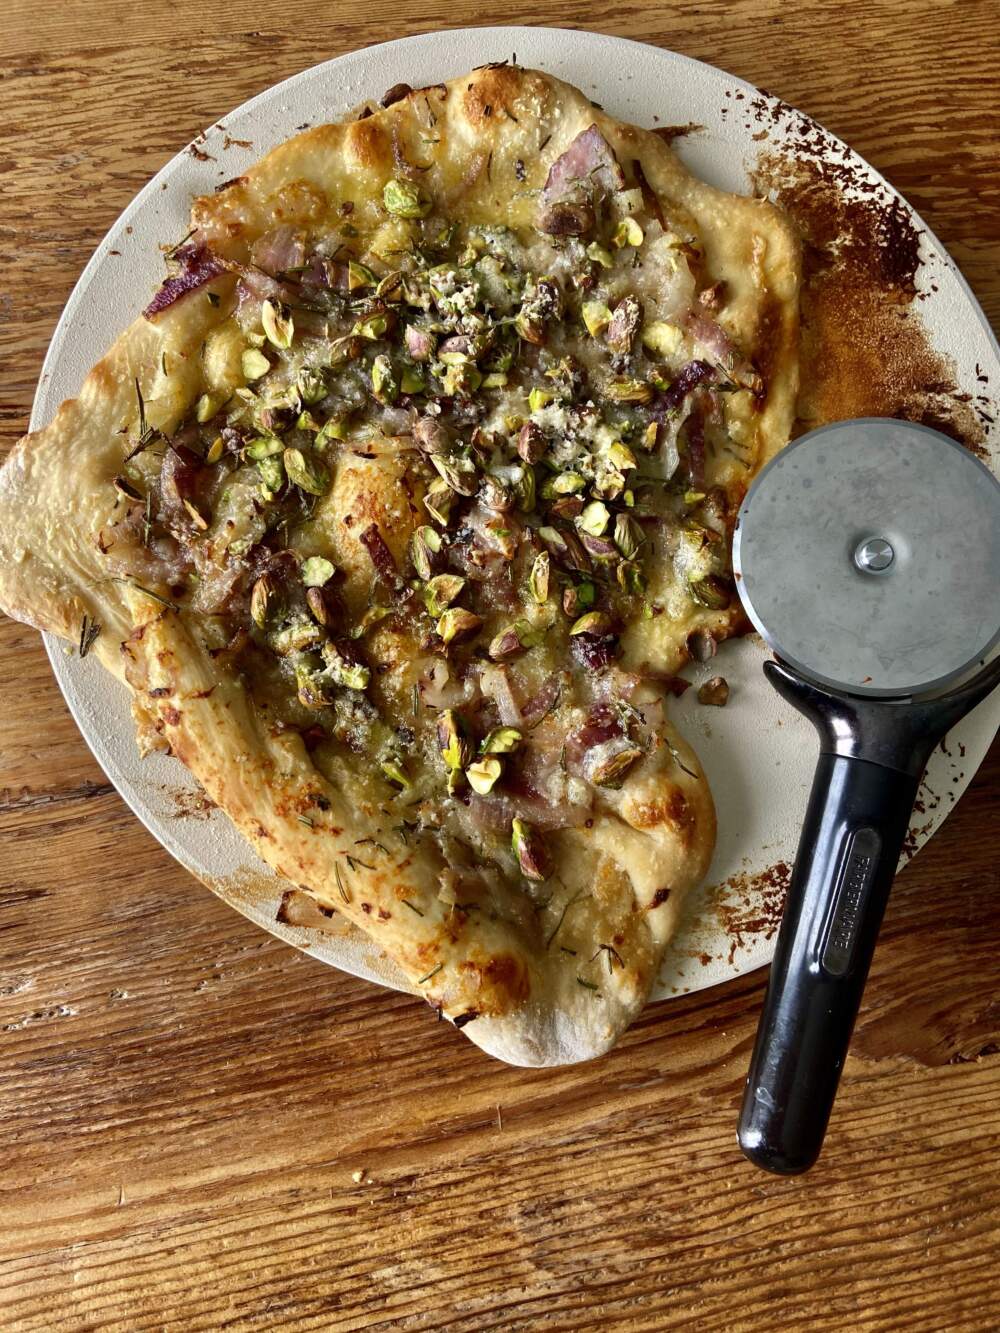 Red onion, rosemary, parmesan and pistachio pizza. (Kathy Gunst/Here & Now)